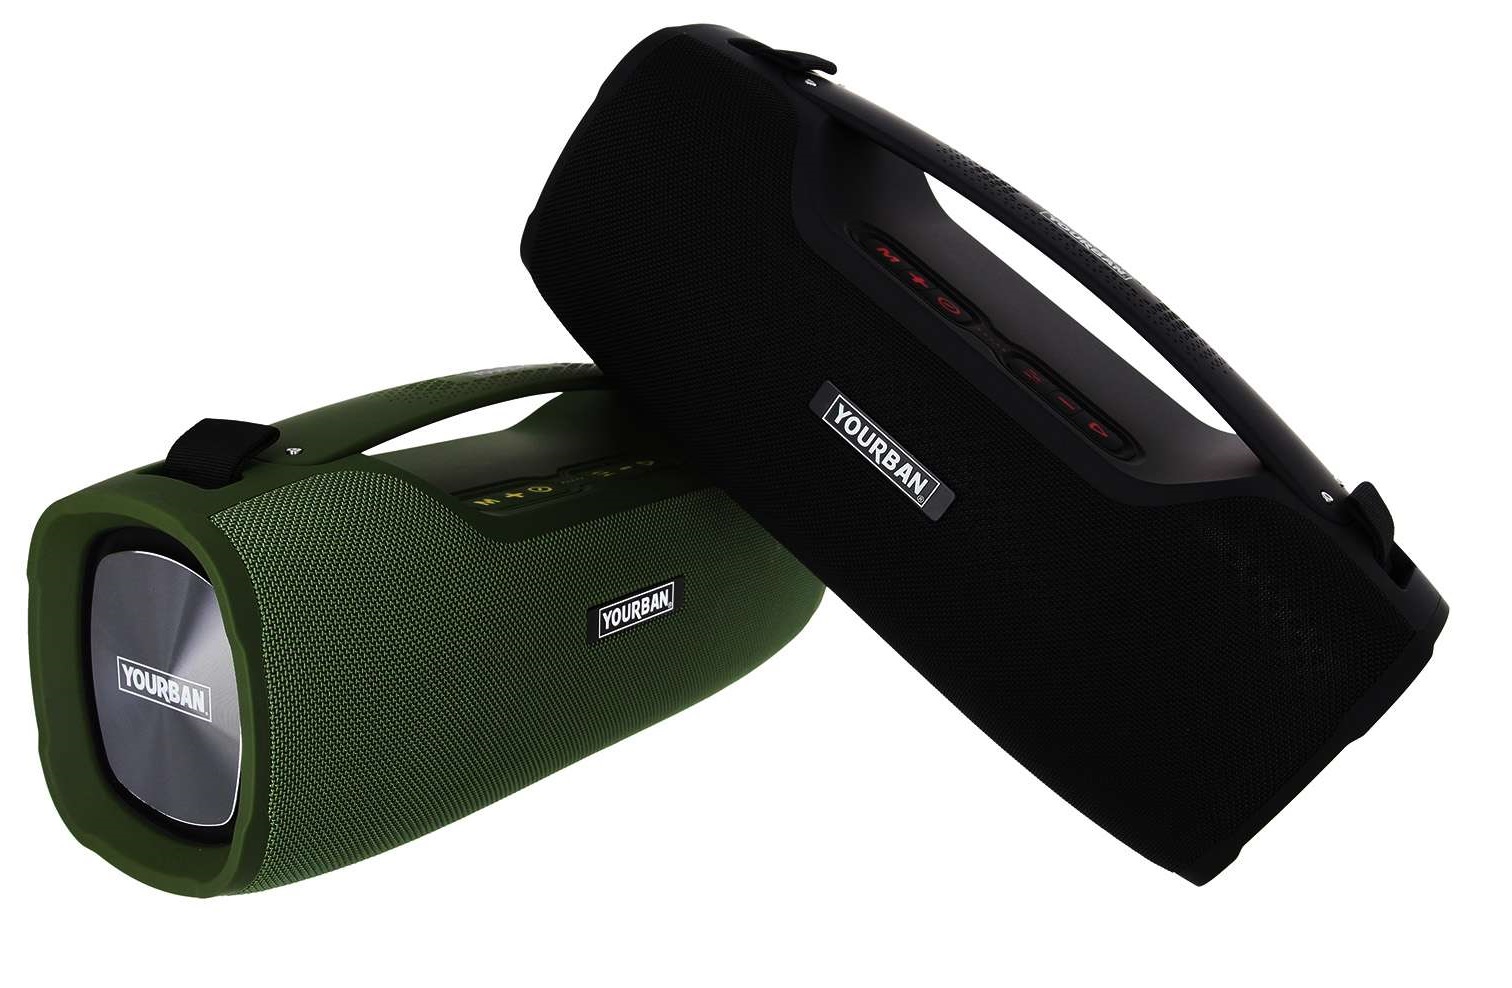 Yourban Getone 70 Green - Portable PA system - Variation 2